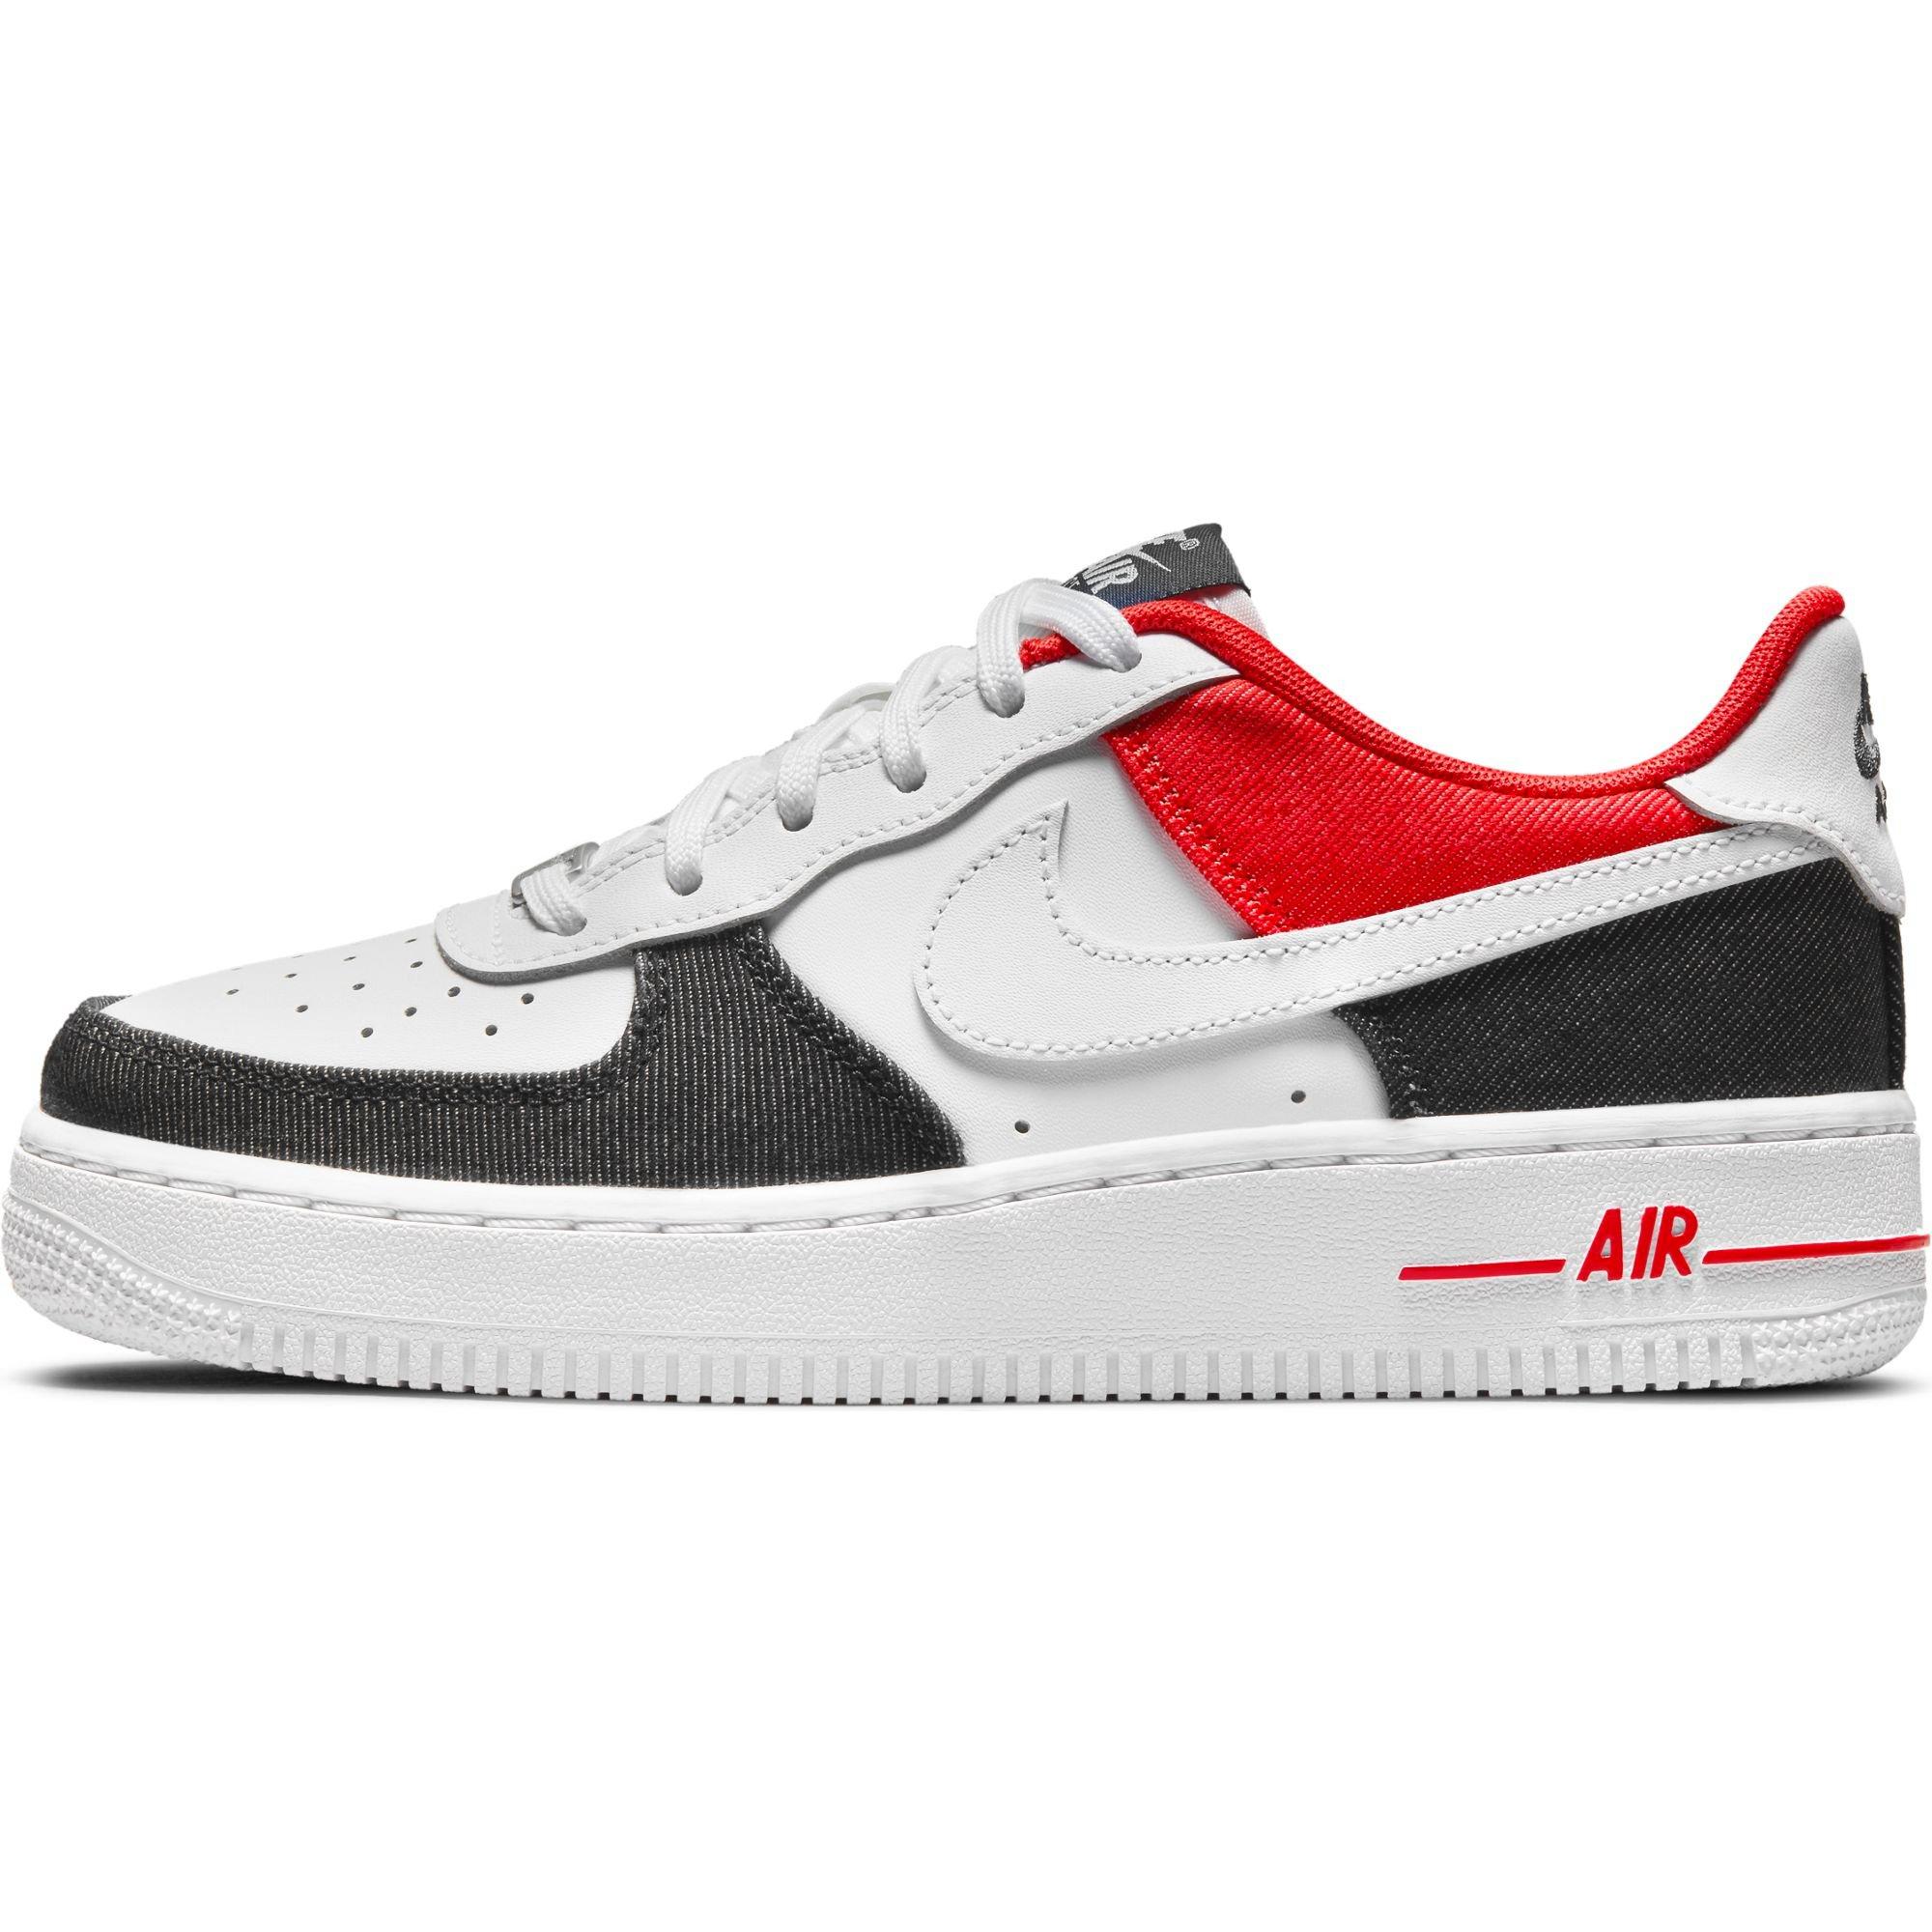 First Look: Nike Air Force 1 Mid '07 LV8 Utility – Red  Nike air force 1  outfit, Air force one shoes, Sneakers men fashion